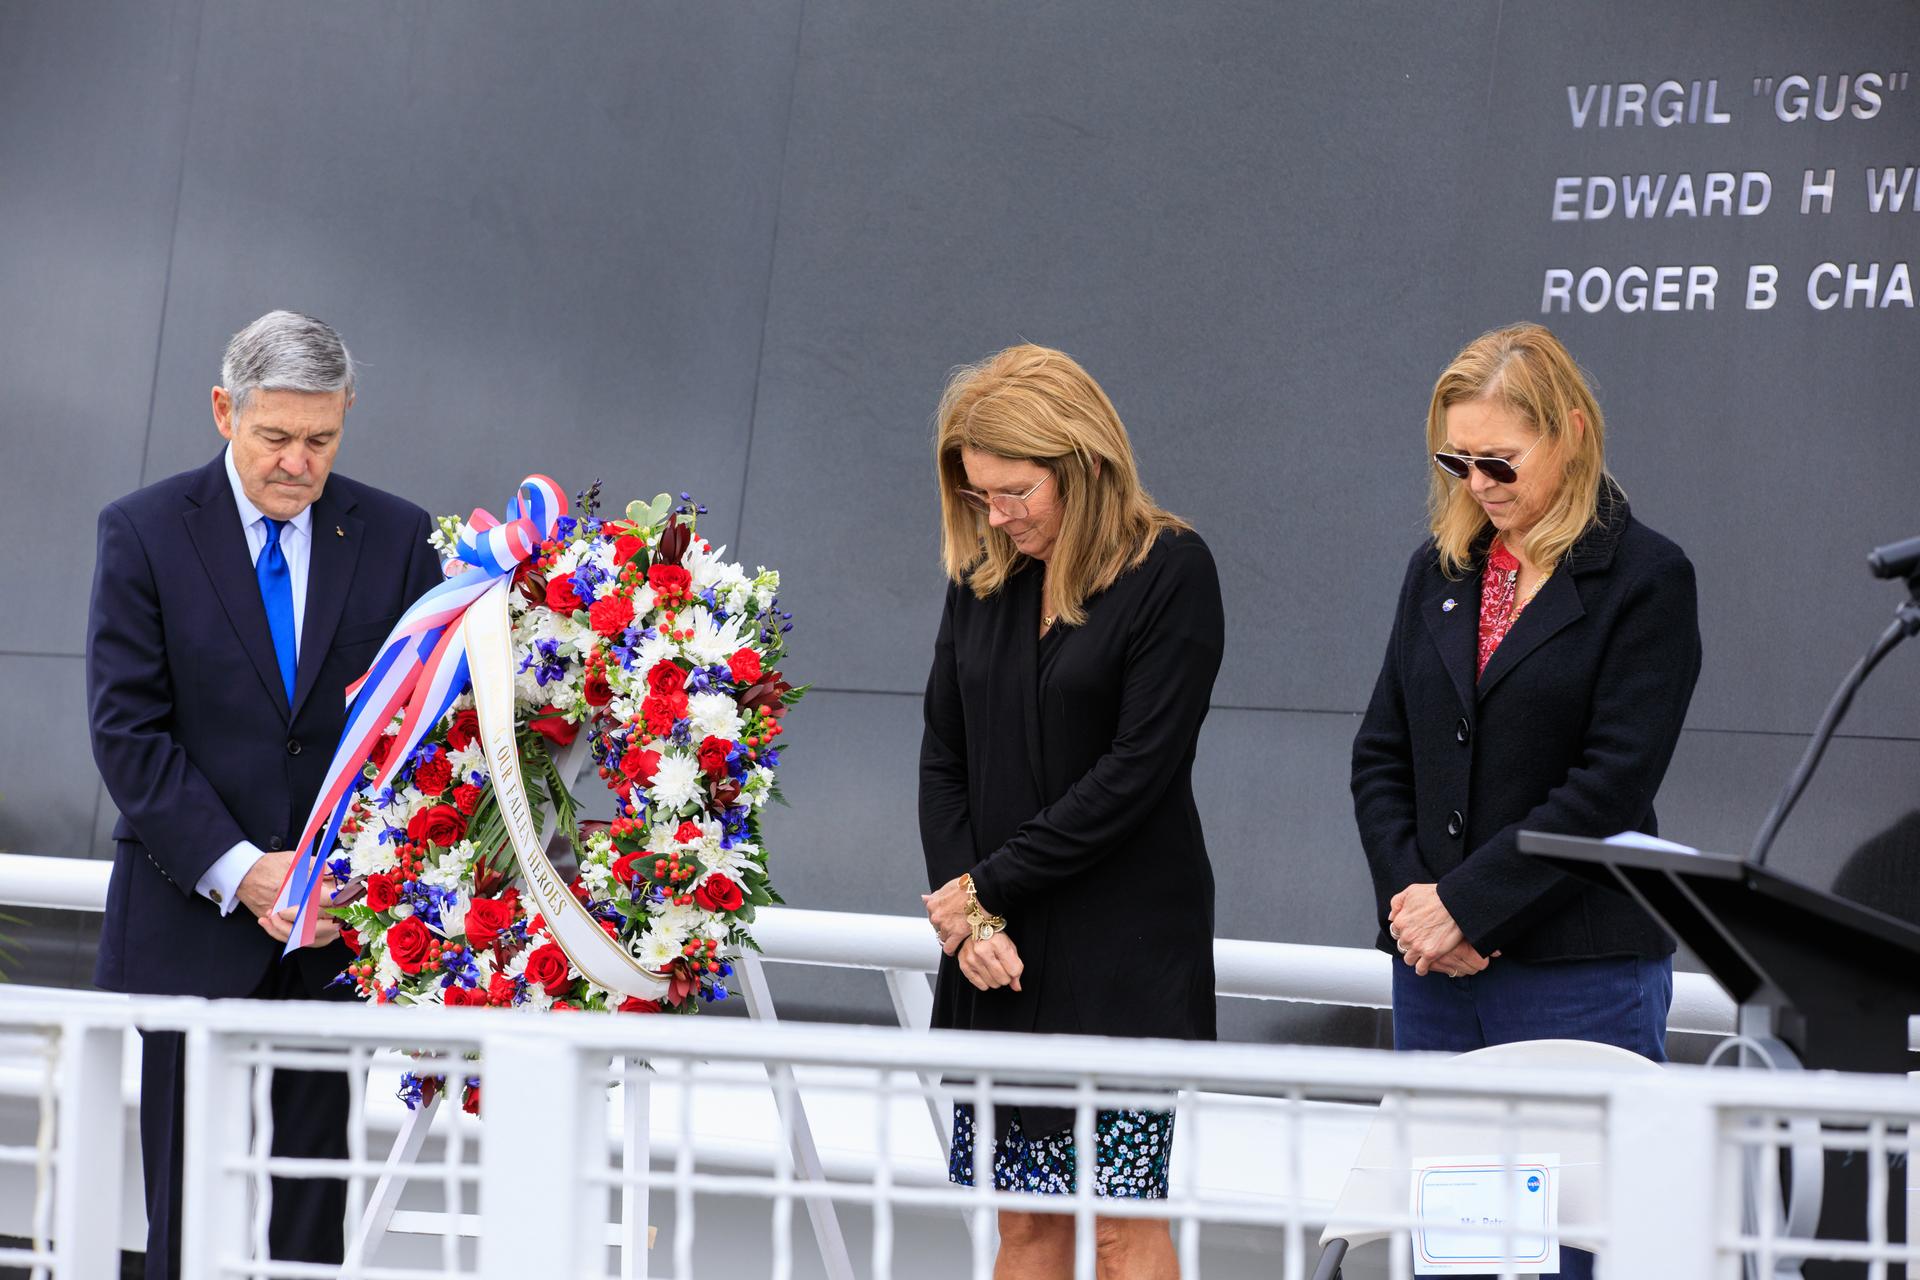 A wreath is placed at the Space Mirror Memorial during the Day of Remembrance ceremony at the Kennedy Space Center Visitor Complex in Florida on Jan. 26, 2023. 